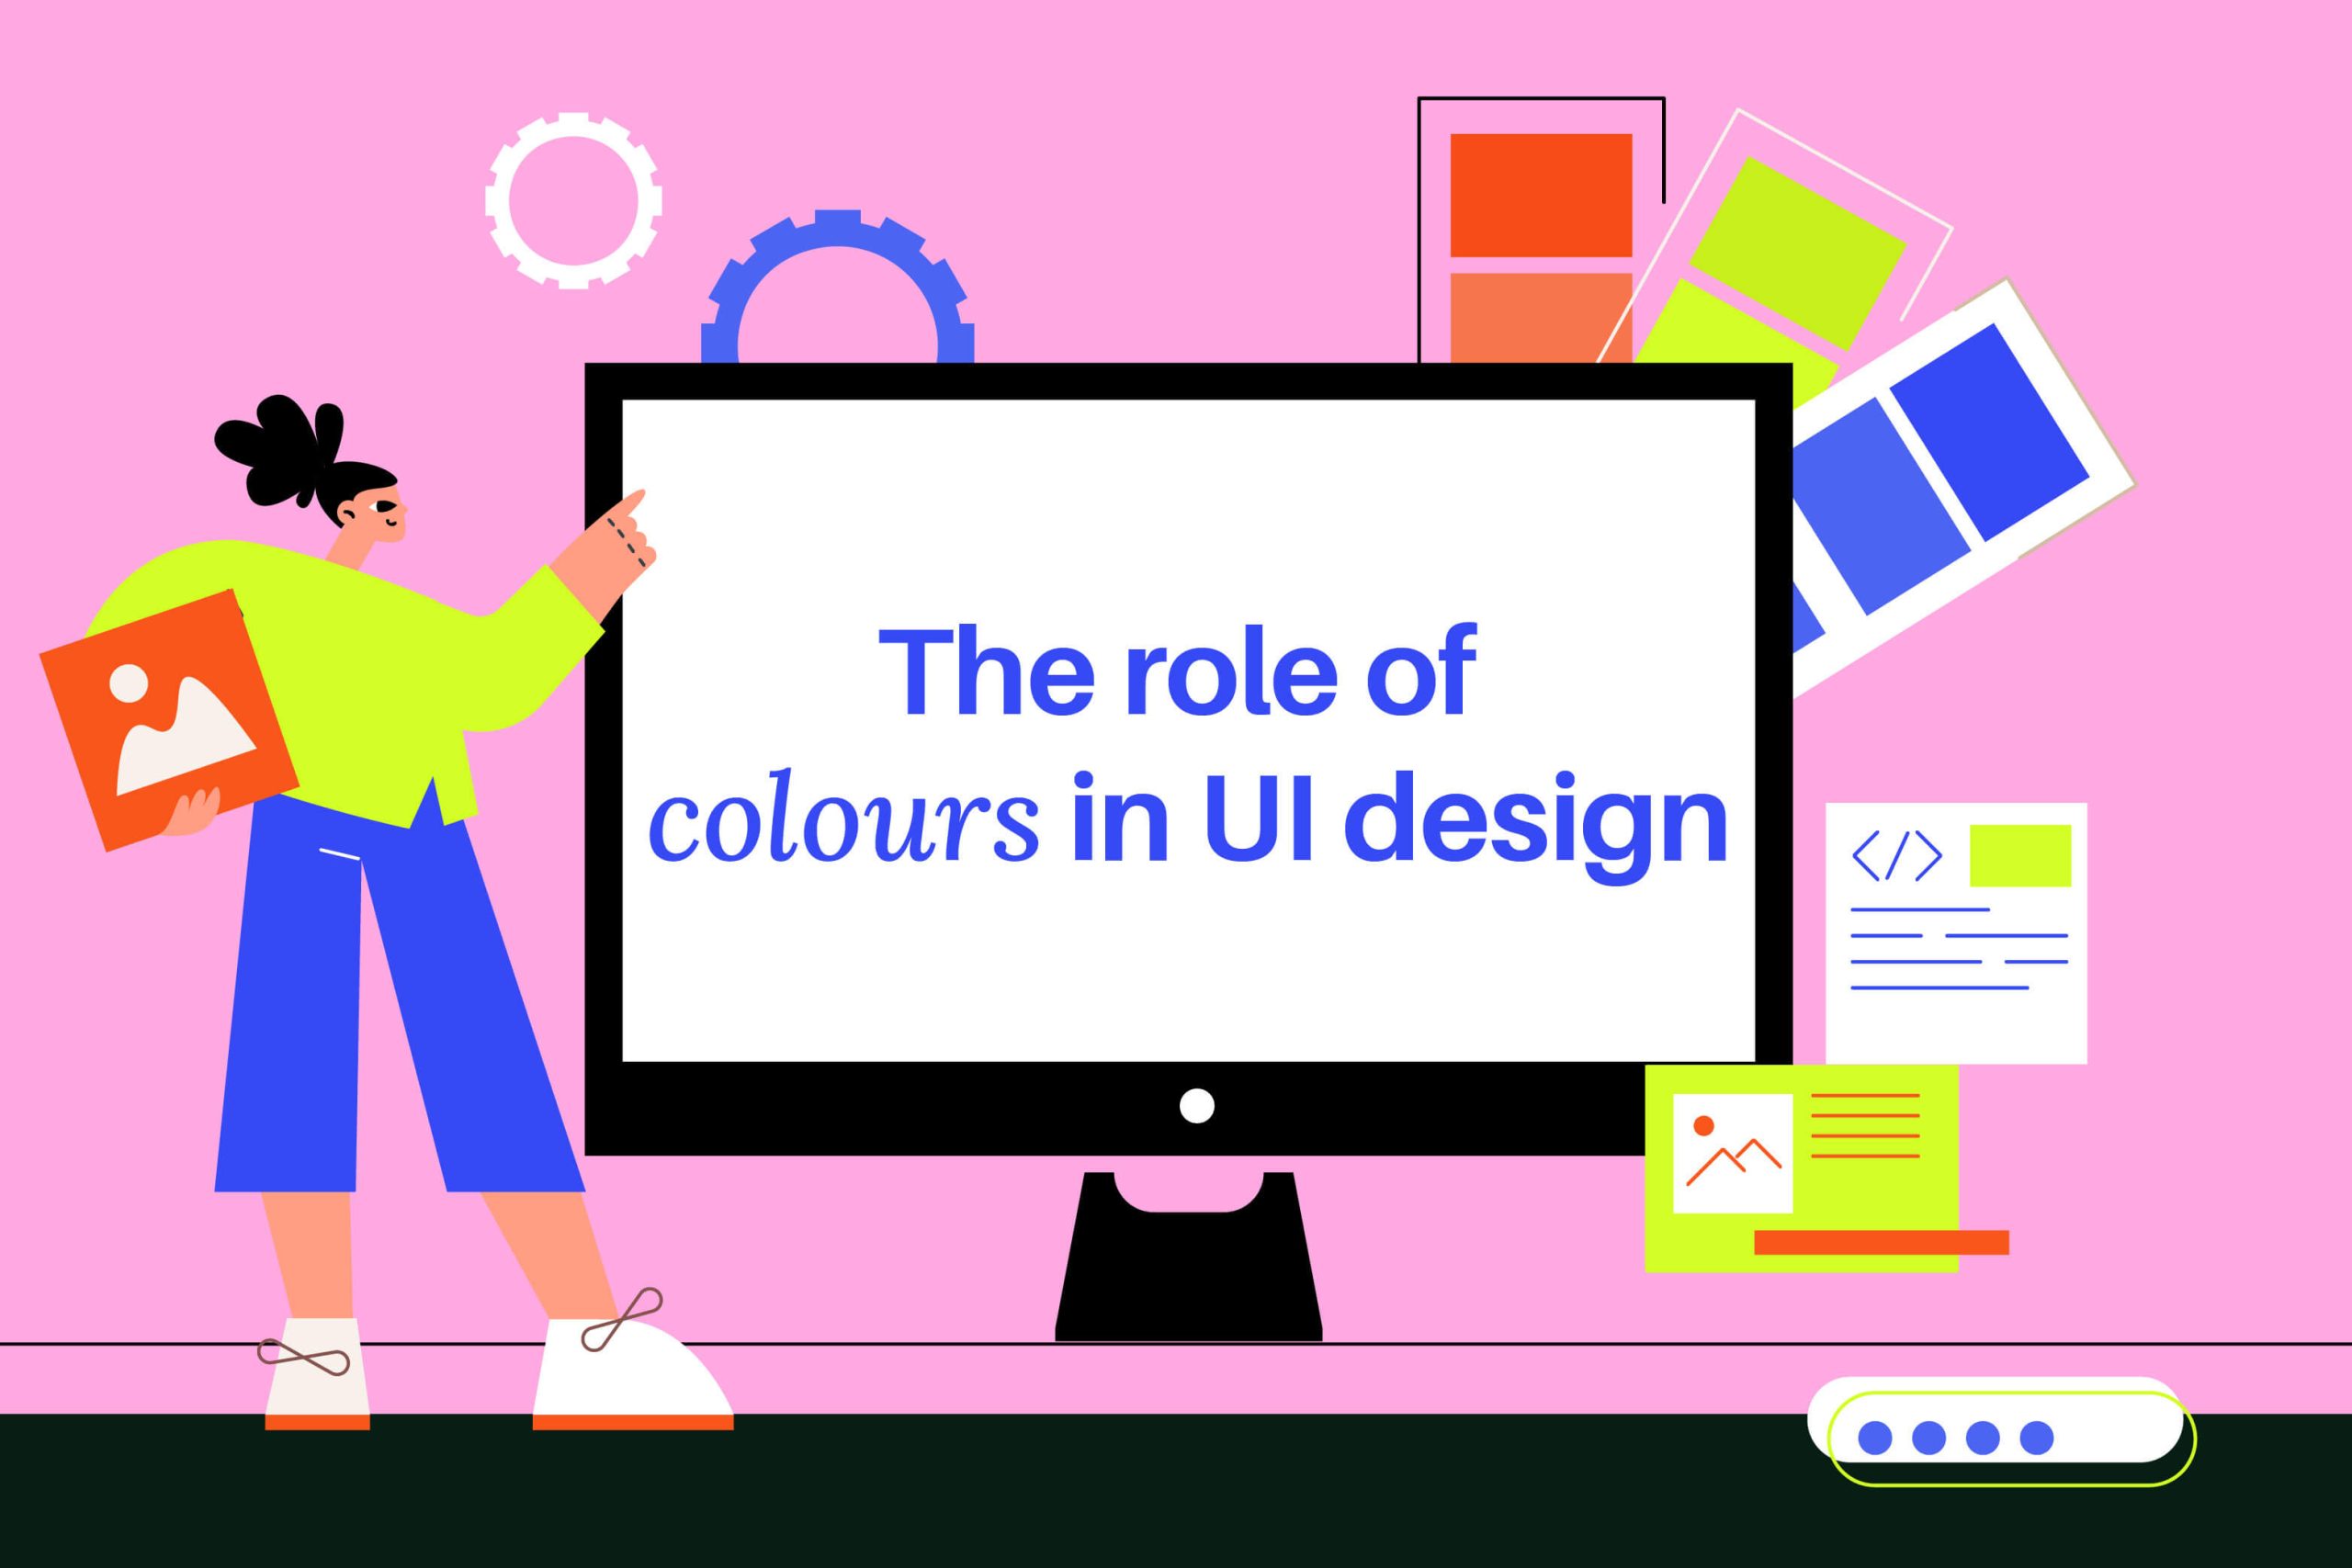 The role of colours in UI design